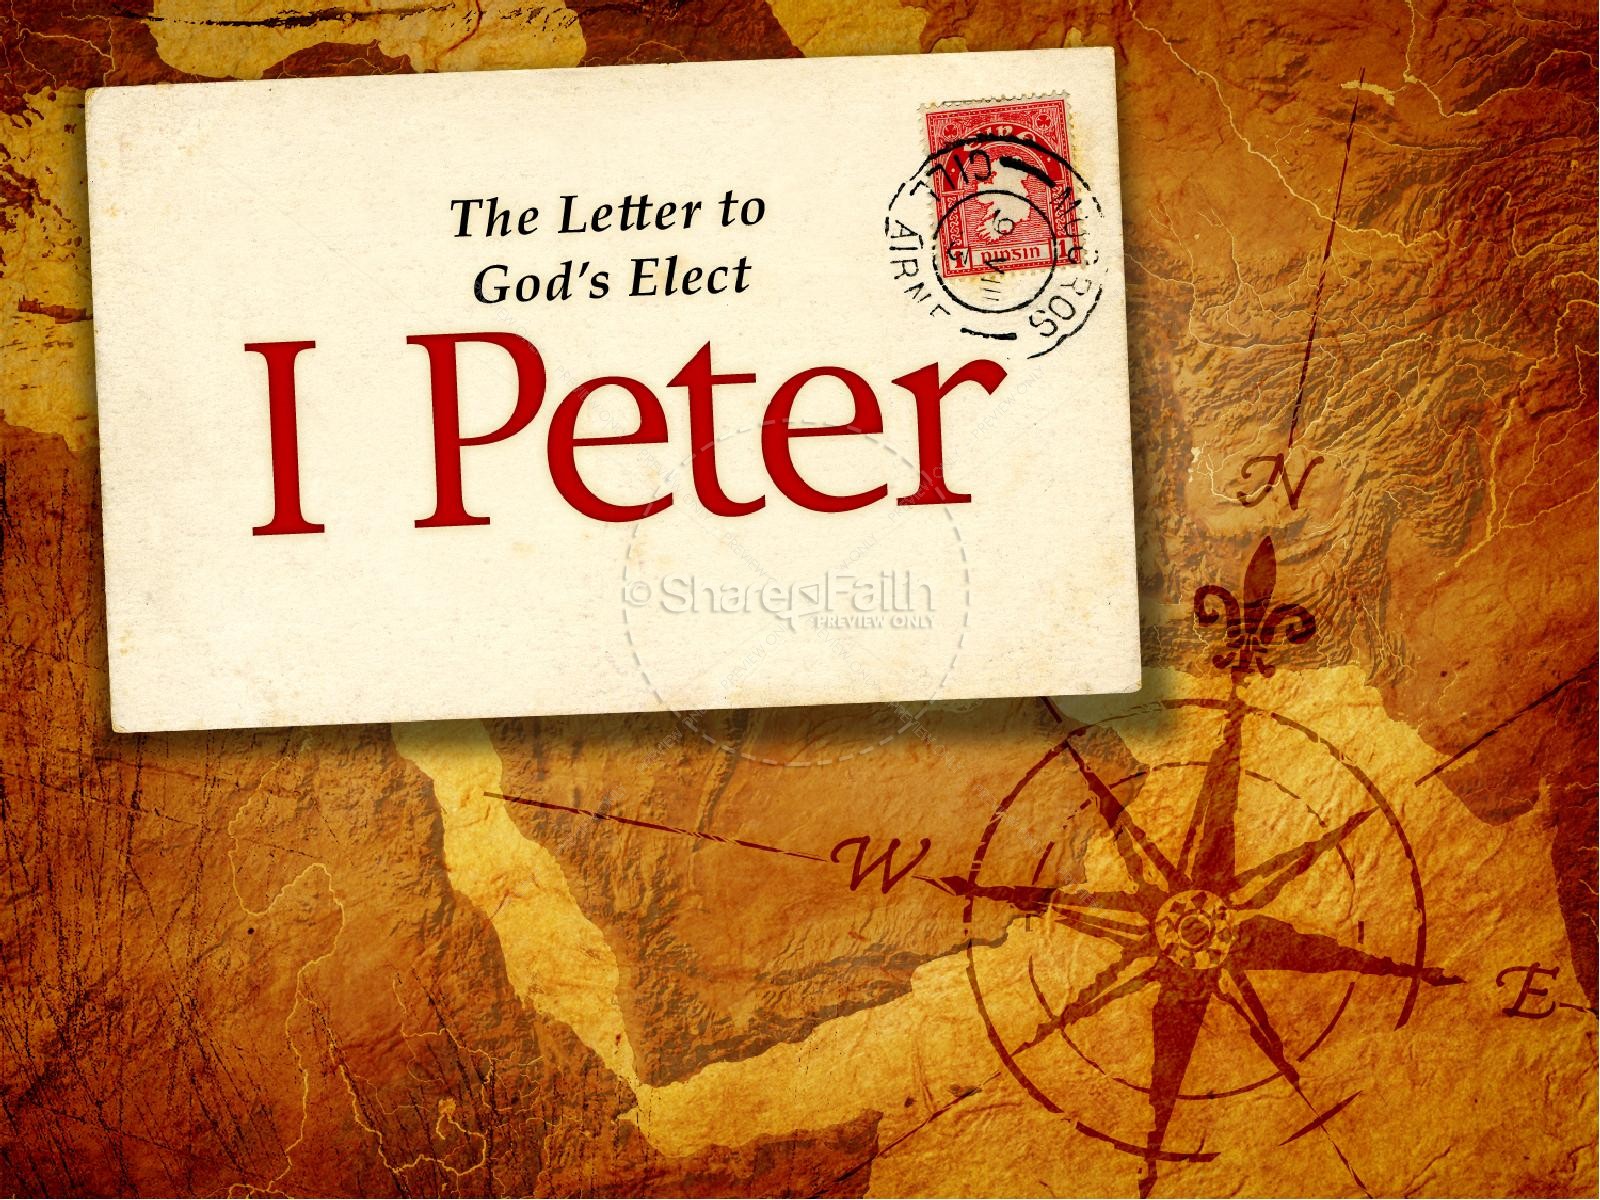 The end of the letter